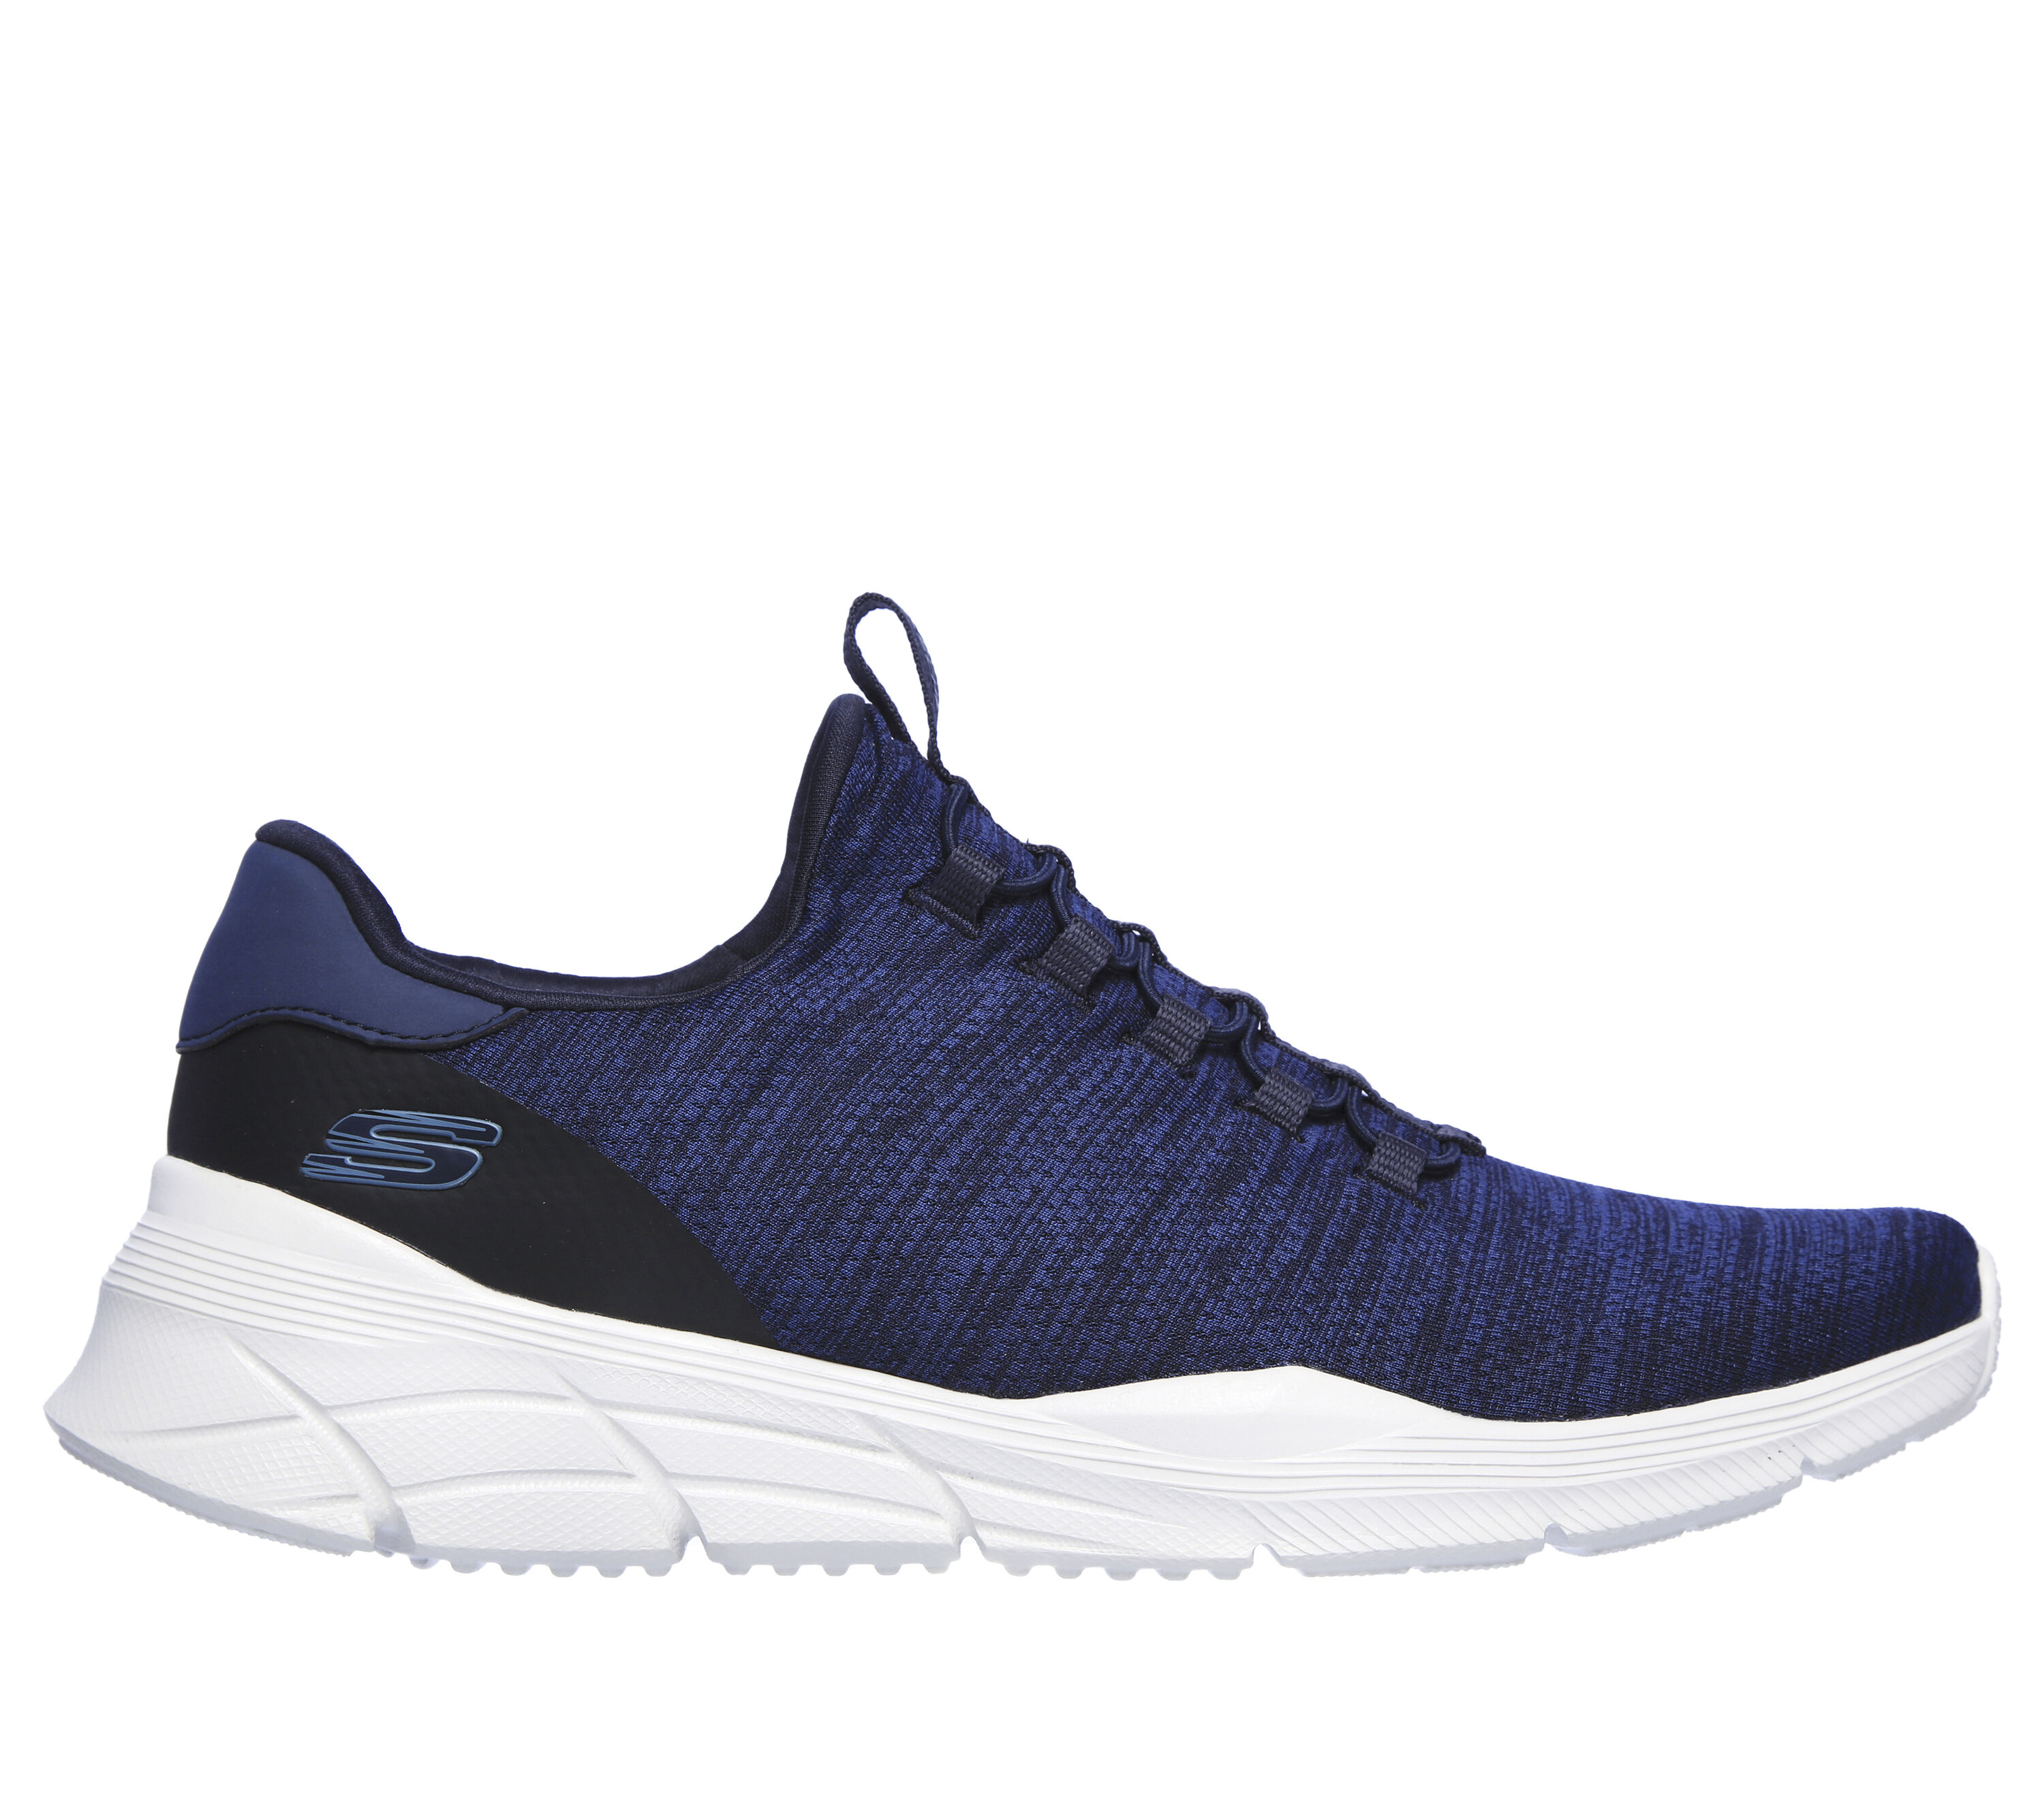 Shop the Relaxed Fit: Equalizer 4.0 - Voltis | SKECHERS